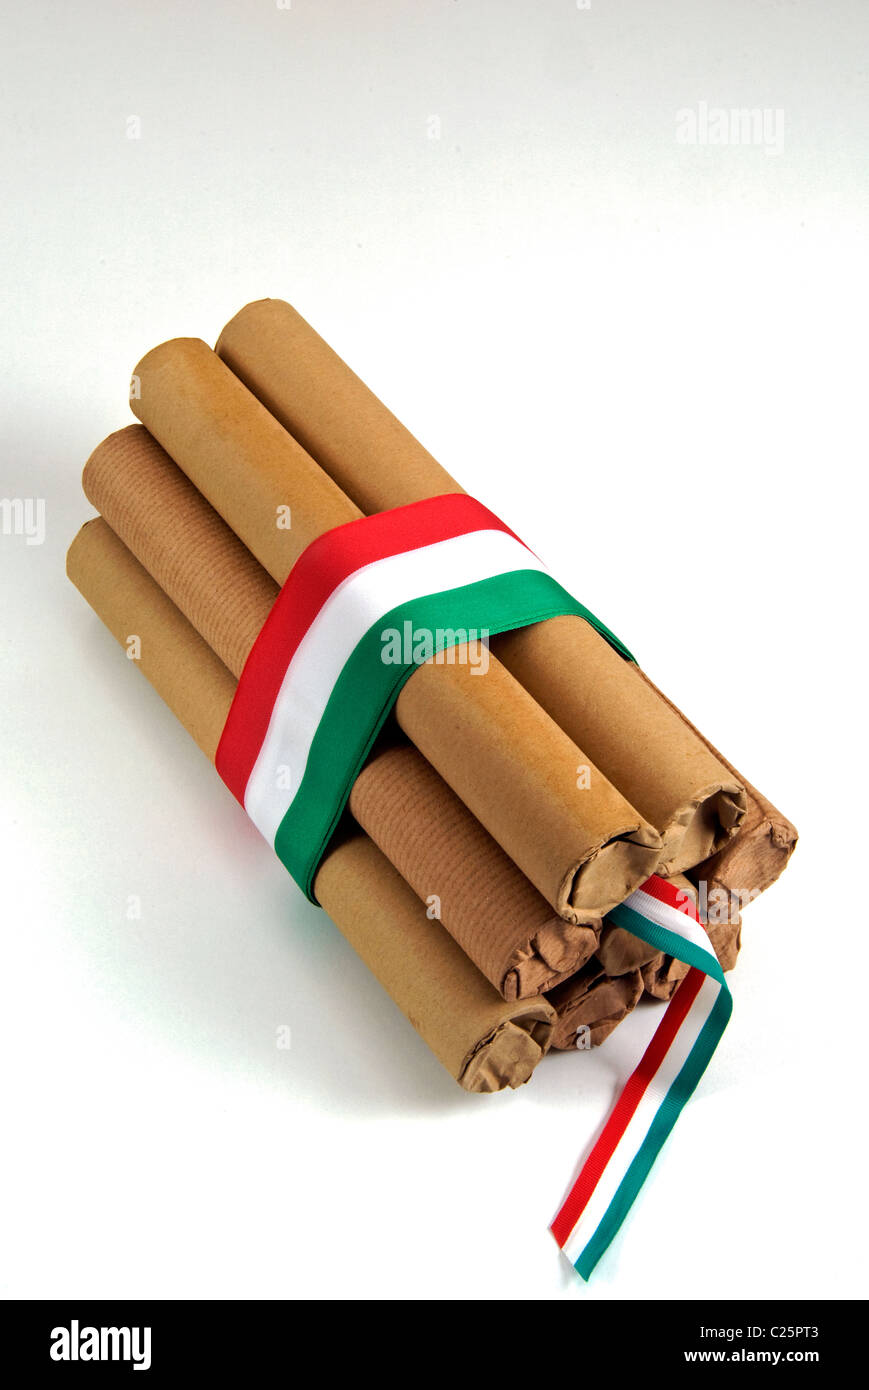 Explosive situation in Italy, Dynamite with italian flag Stock Photo